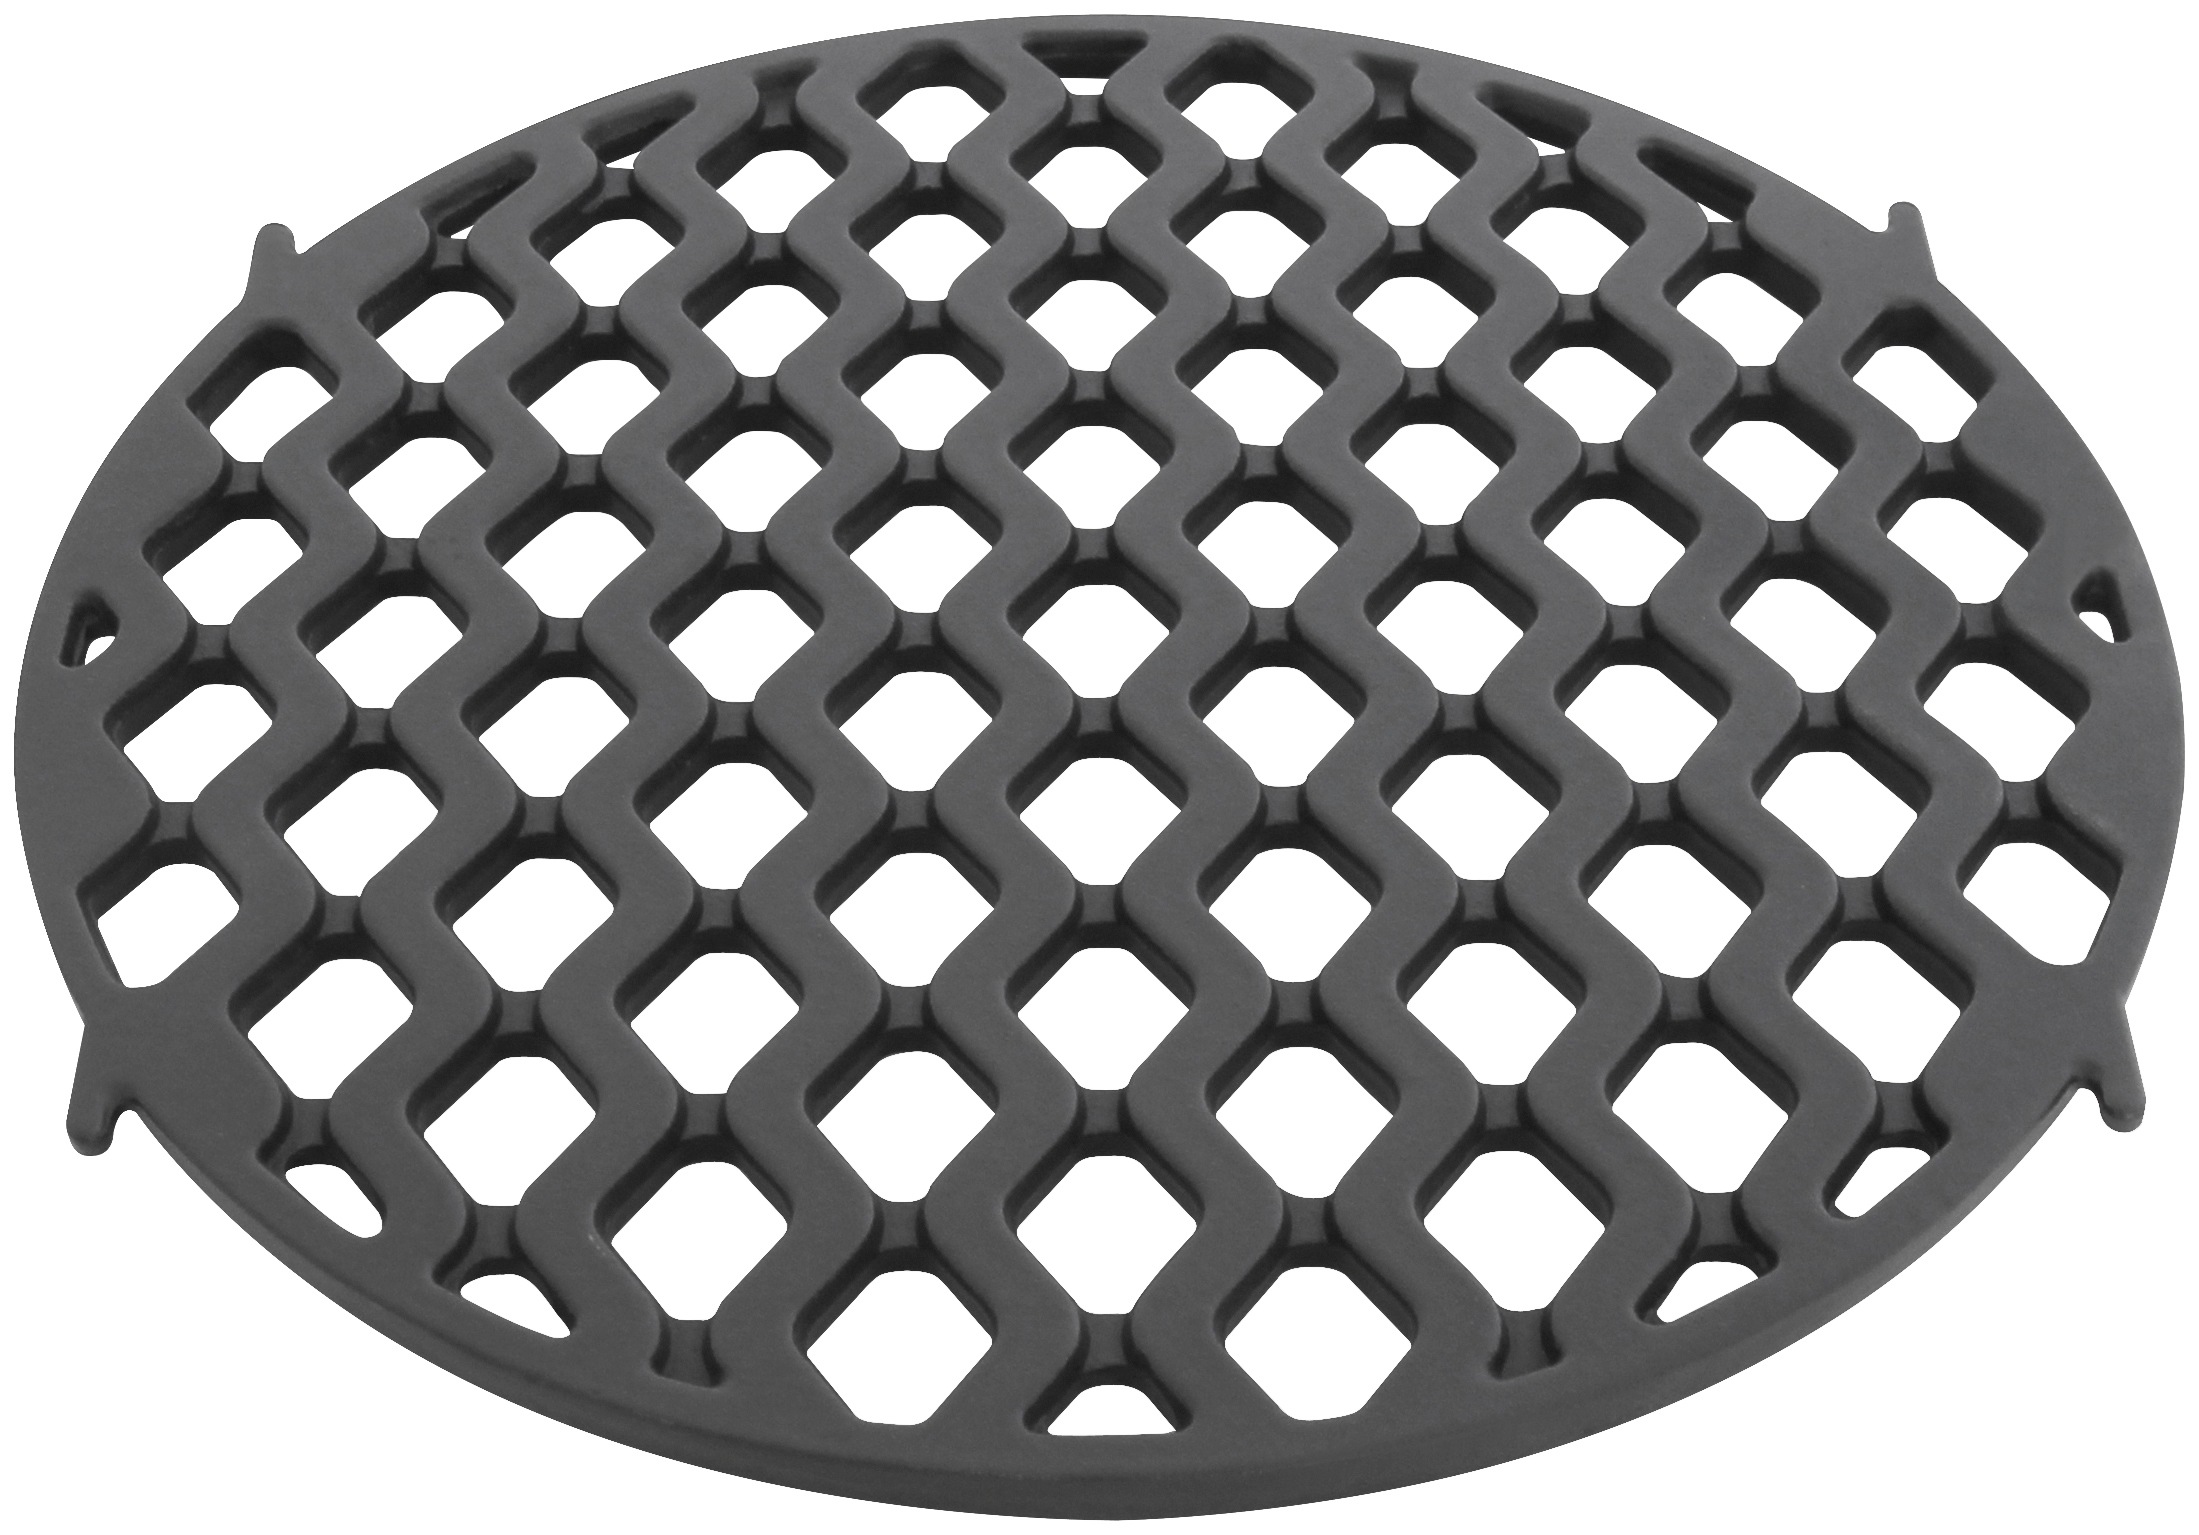 Enders Grillrost "SWITCH GRID Sear Grate", BxT: 30x30 cm